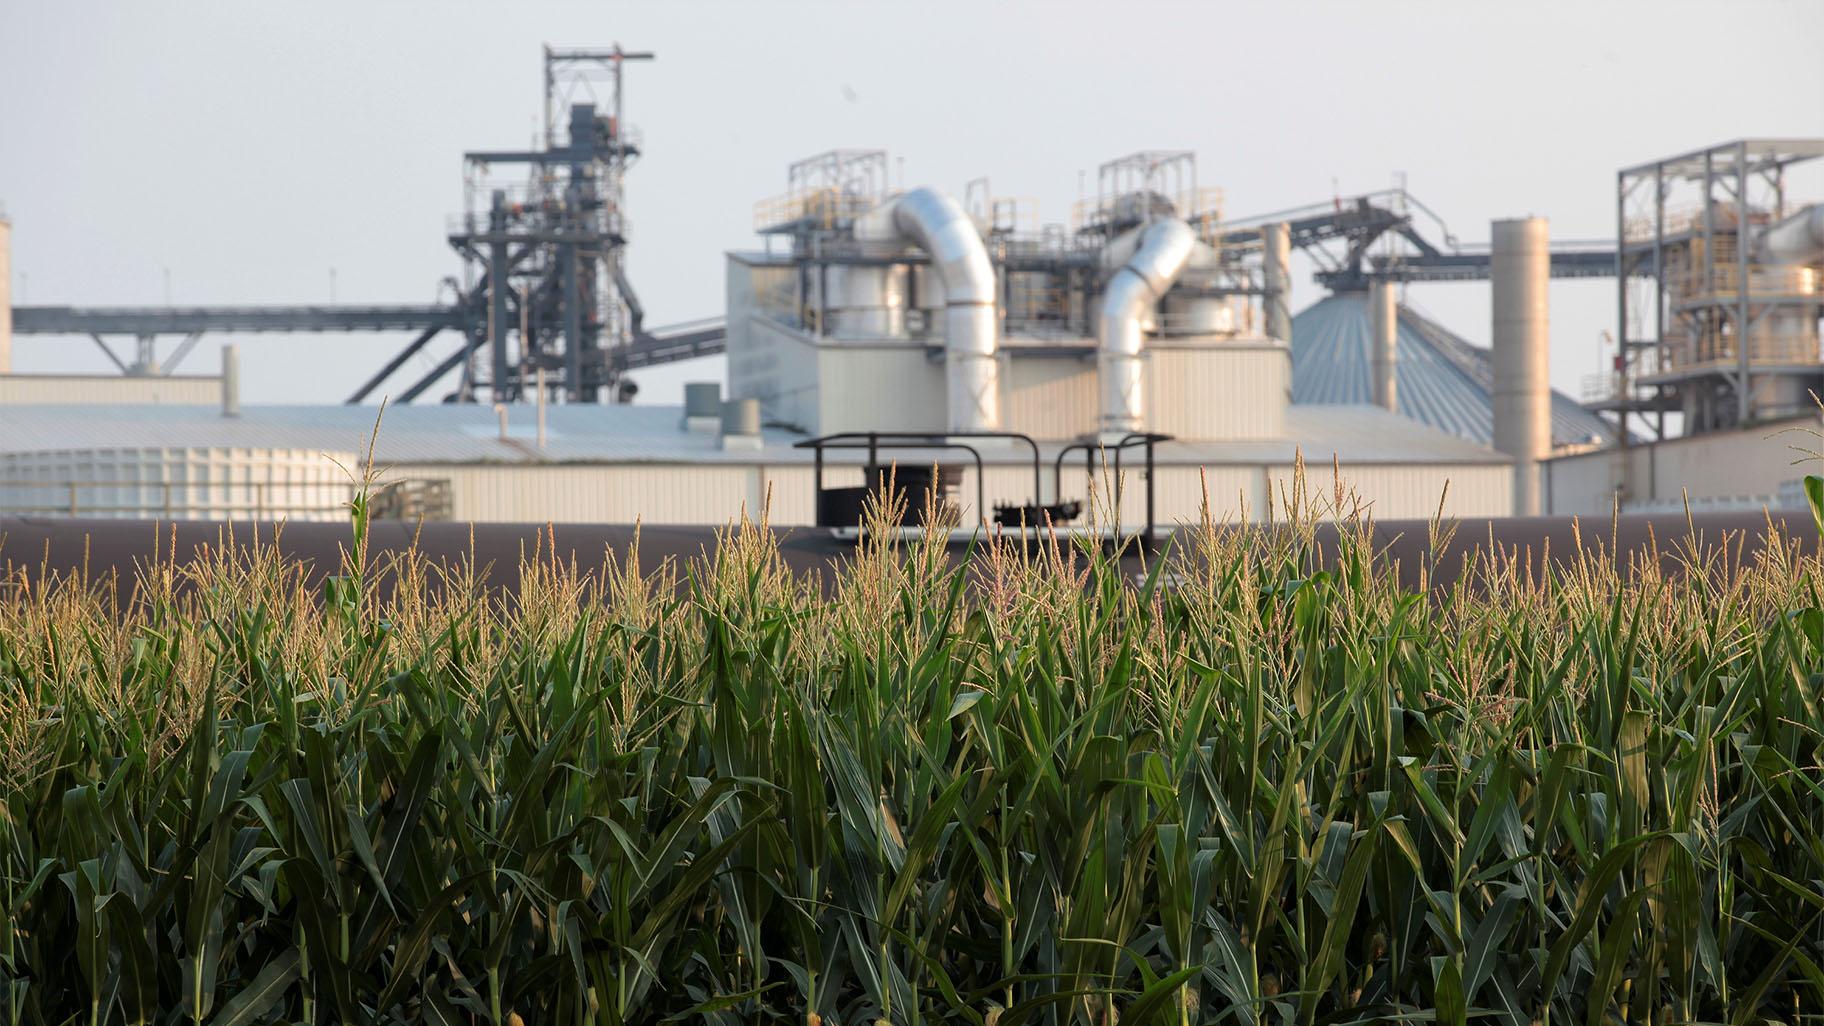 Project developers plan to build carbon capture pipelines connecting dozens of Midwestern ethanol refineries, such as this one in Chancellor, South Dakota, shown on Thursday, July 22, 2021. Corn absorbs the greenhouse gas carbon dioxide, but the process of fermenting it into ethanol releases carbon dioxide emissions. (AP Photo / Stephen Groves)